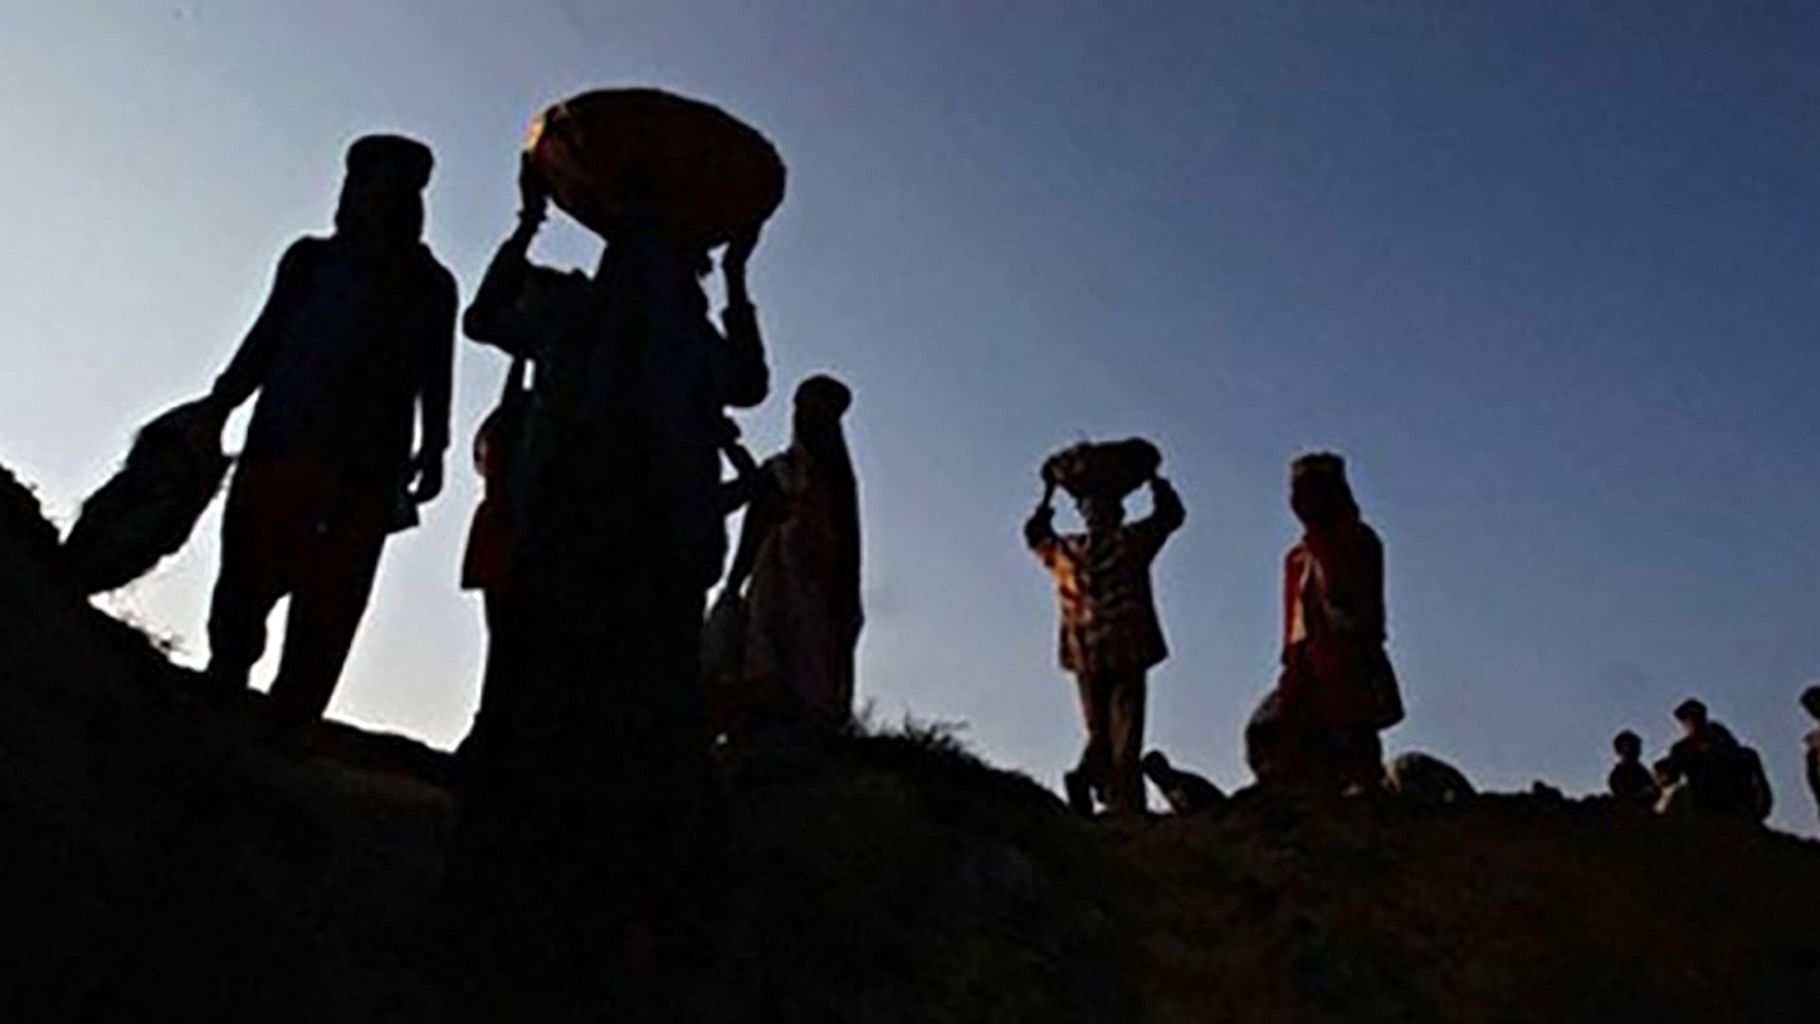 The Centre has released Rs 4,431 crore to clear pending wages under MGNREGA and will pay all dues by 10 April.